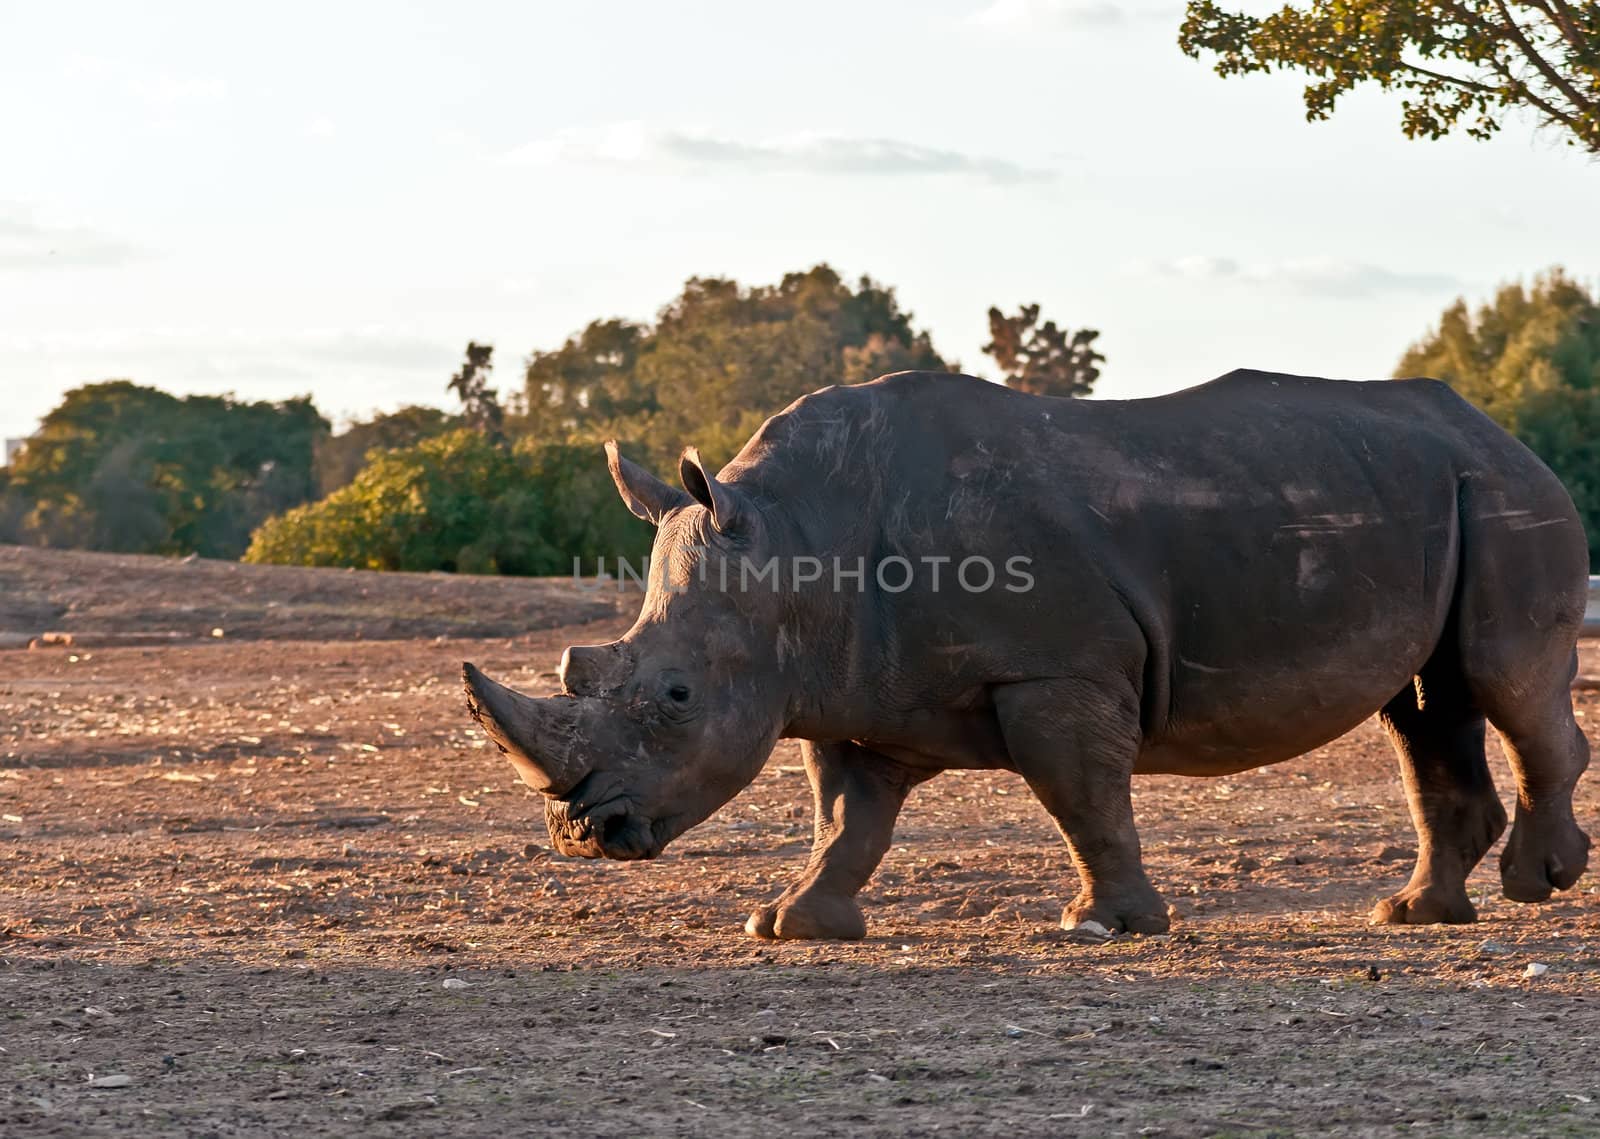 A portrait of a rhino . by LarisaP